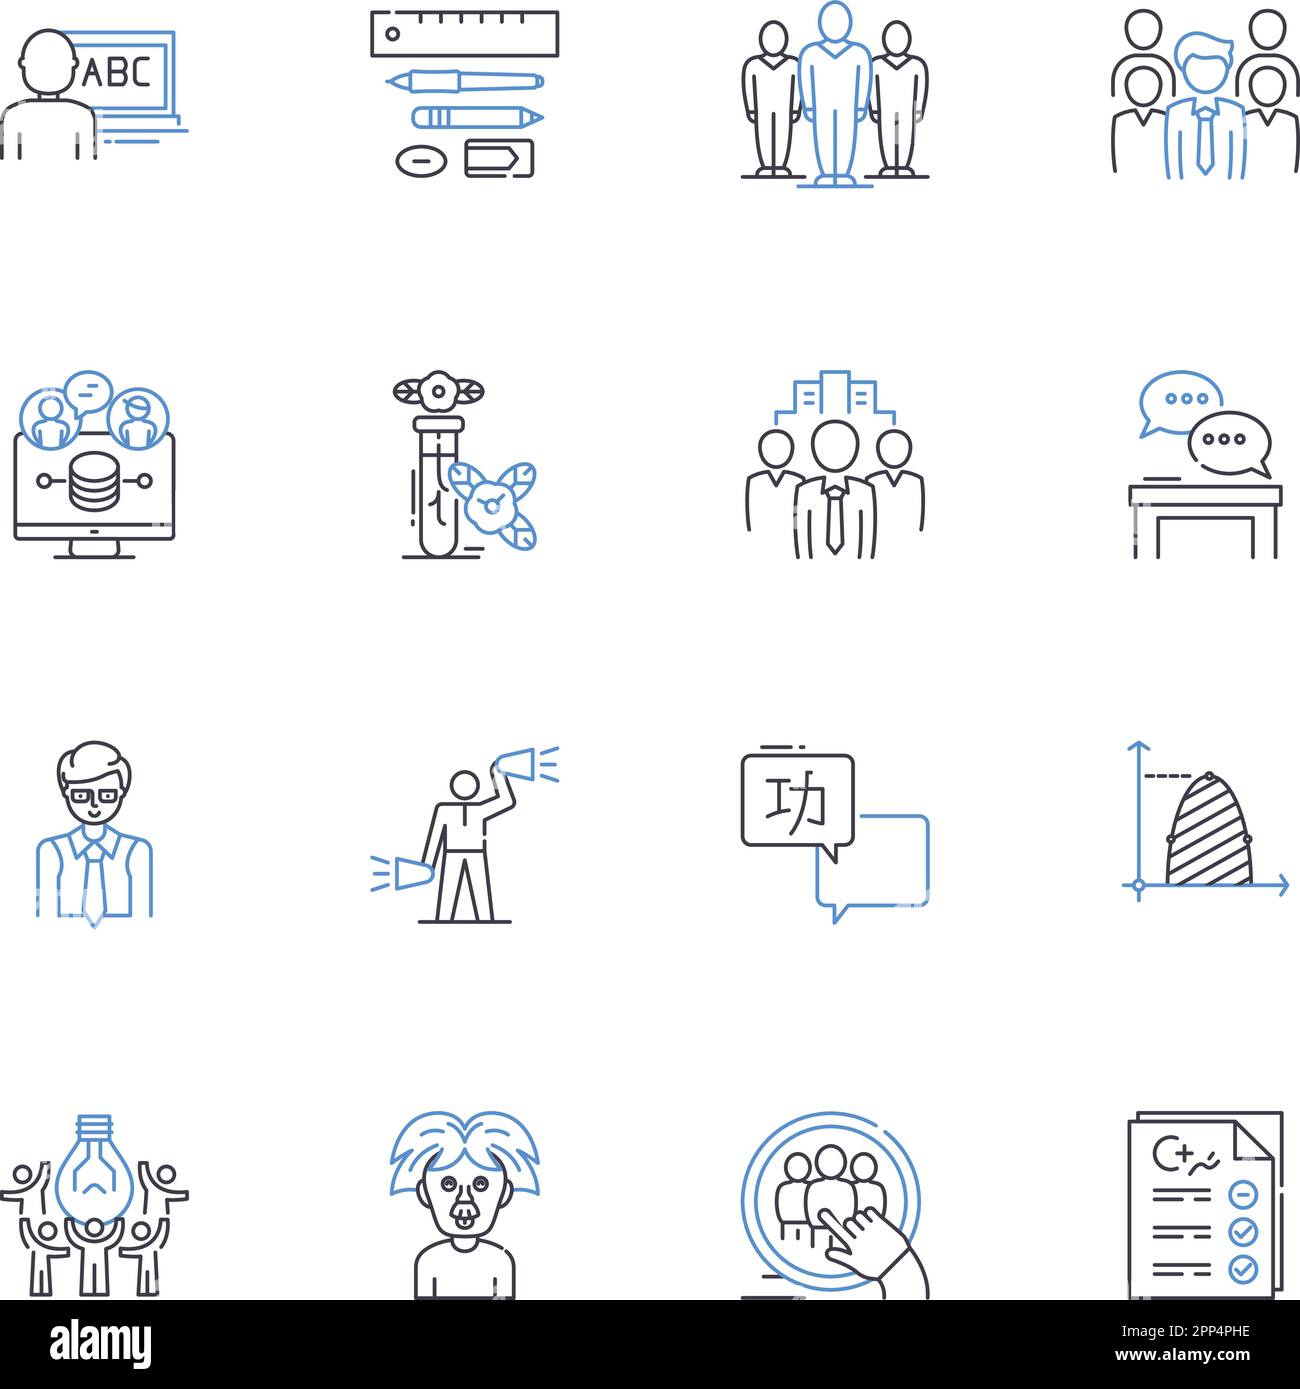 Surveys and polls line icons collection. Feedback, Opinions, Statistics, Data, Research, Results, Responses vector and linear illustration Stock Vector